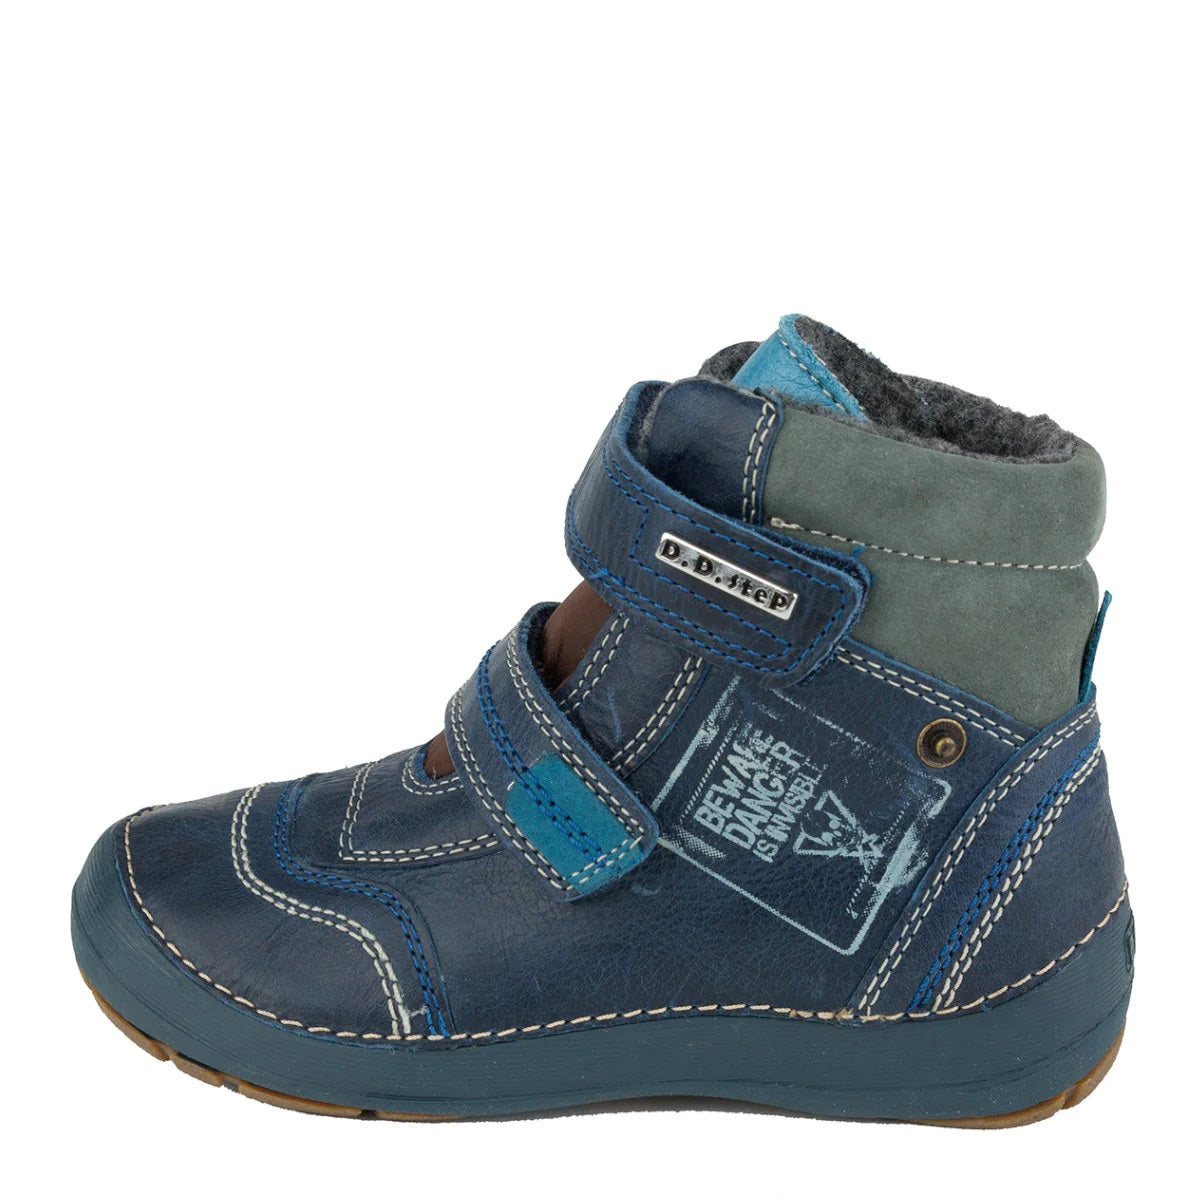 D.D. Step Little Kid Shoes/Winter Boots With Faux Fur Insulation Dark Blue - Supportive Leather Shoes From Europe Kids Orthopedic - shoekid.ca